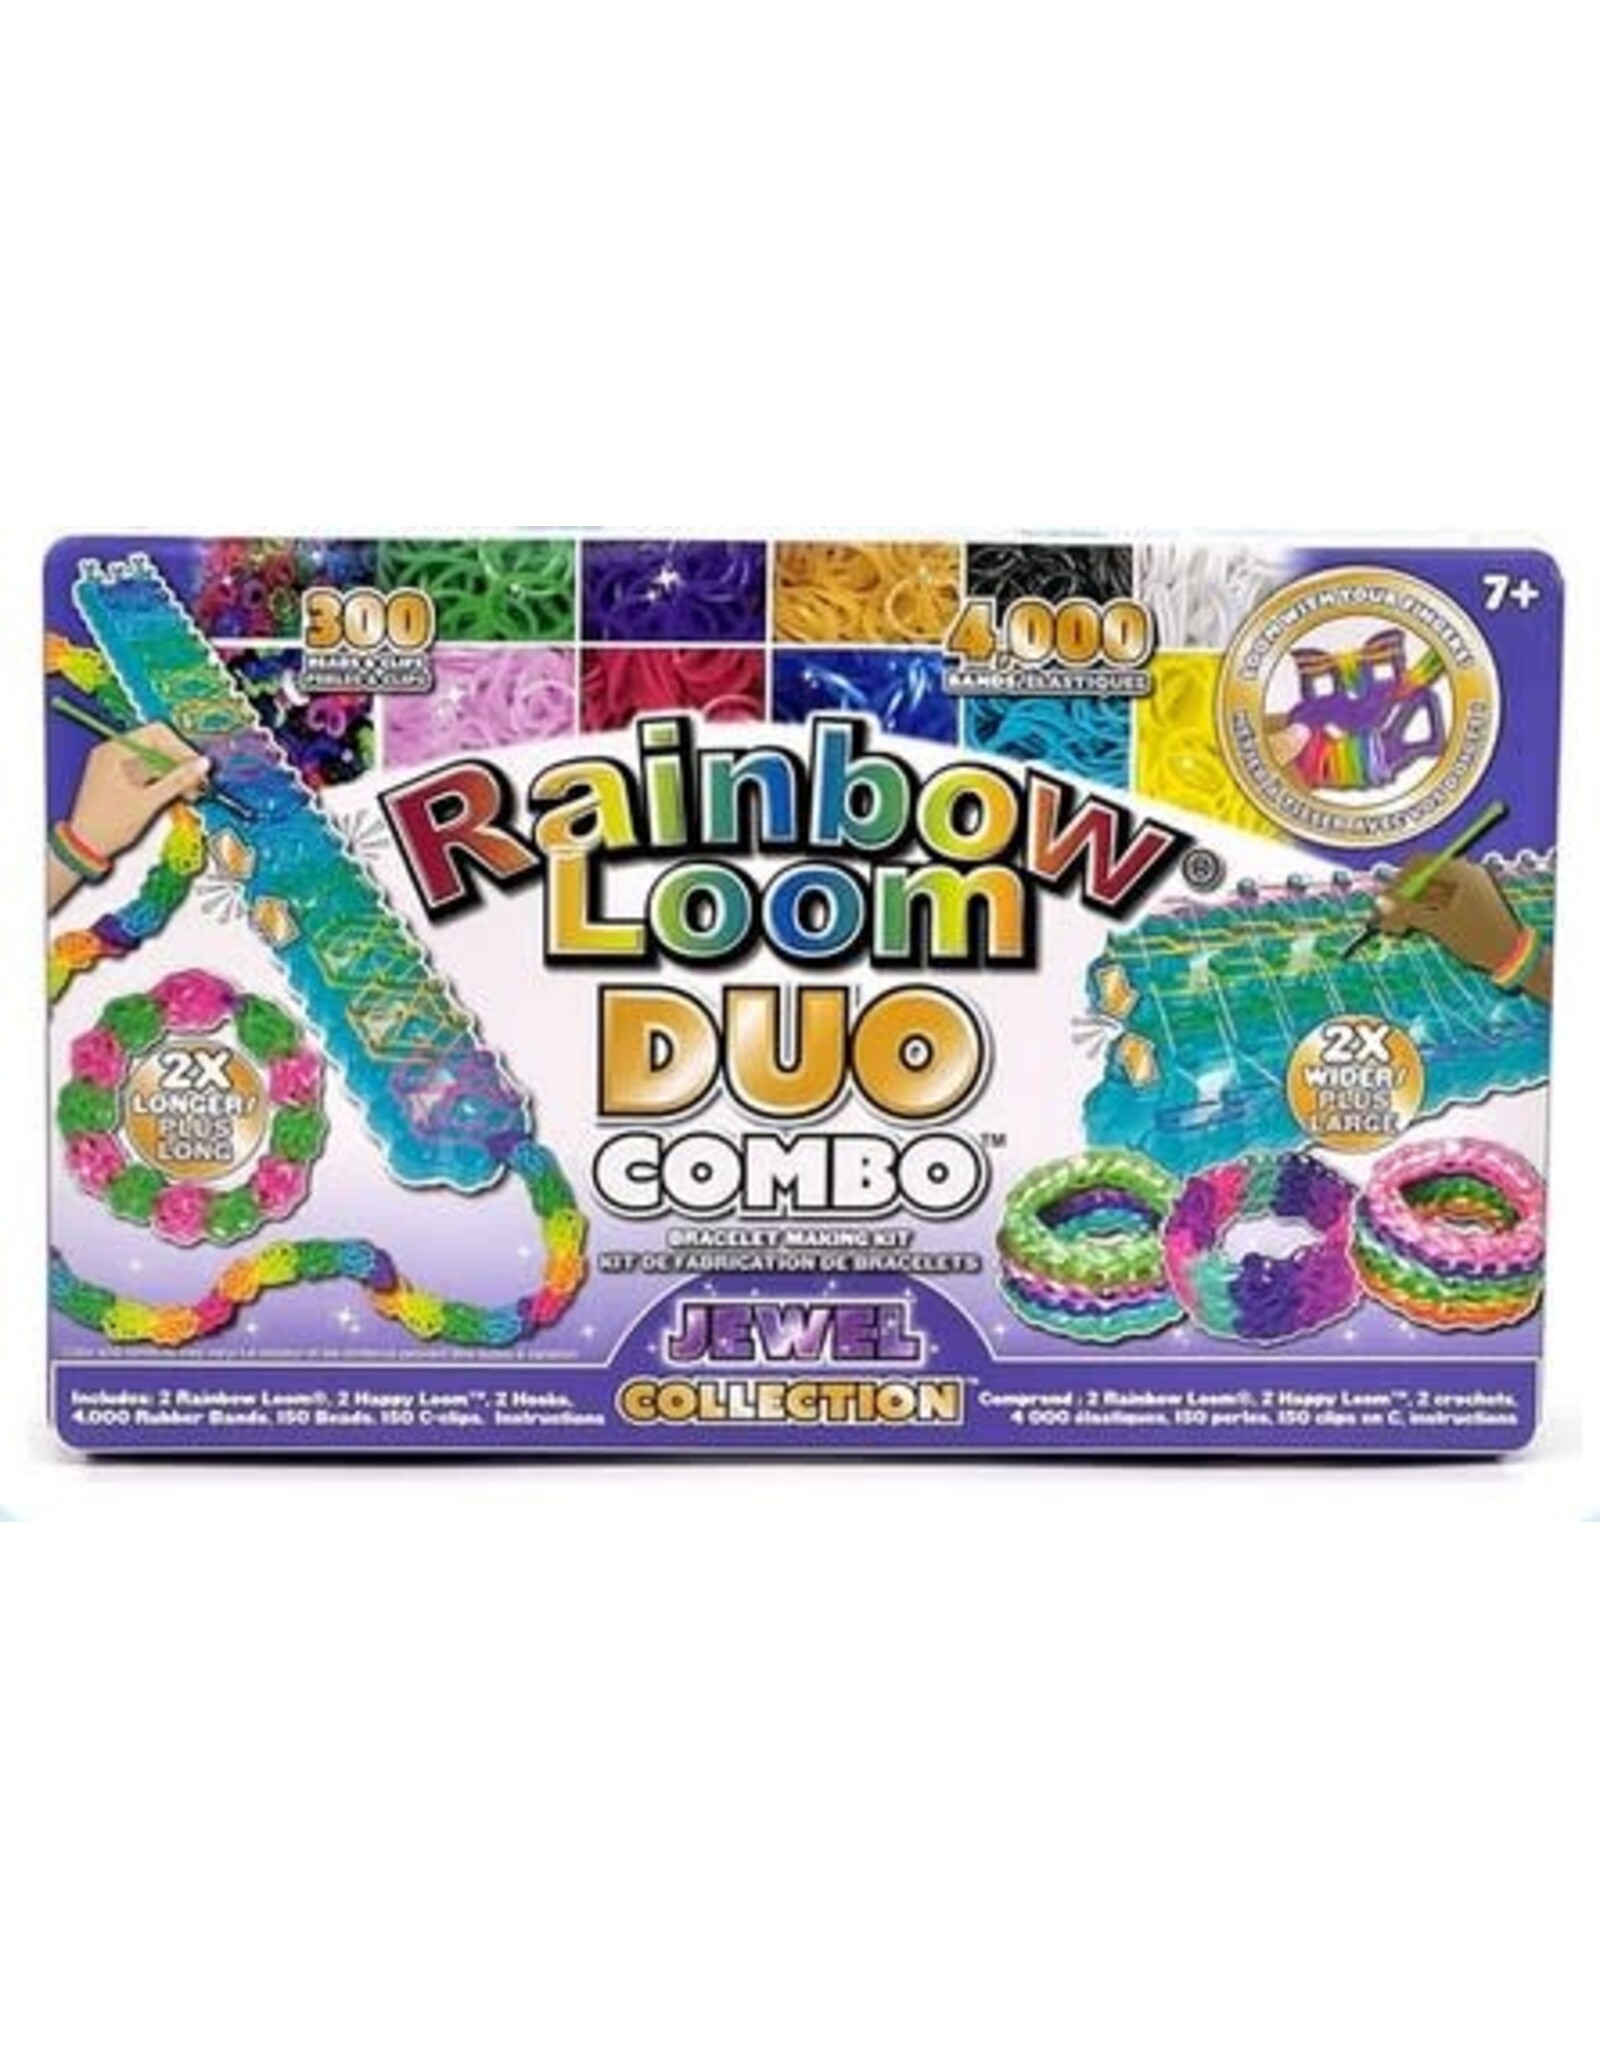 Rainbow Loom Combo Duo Pack -Jewel Collection - Lets Play: Games